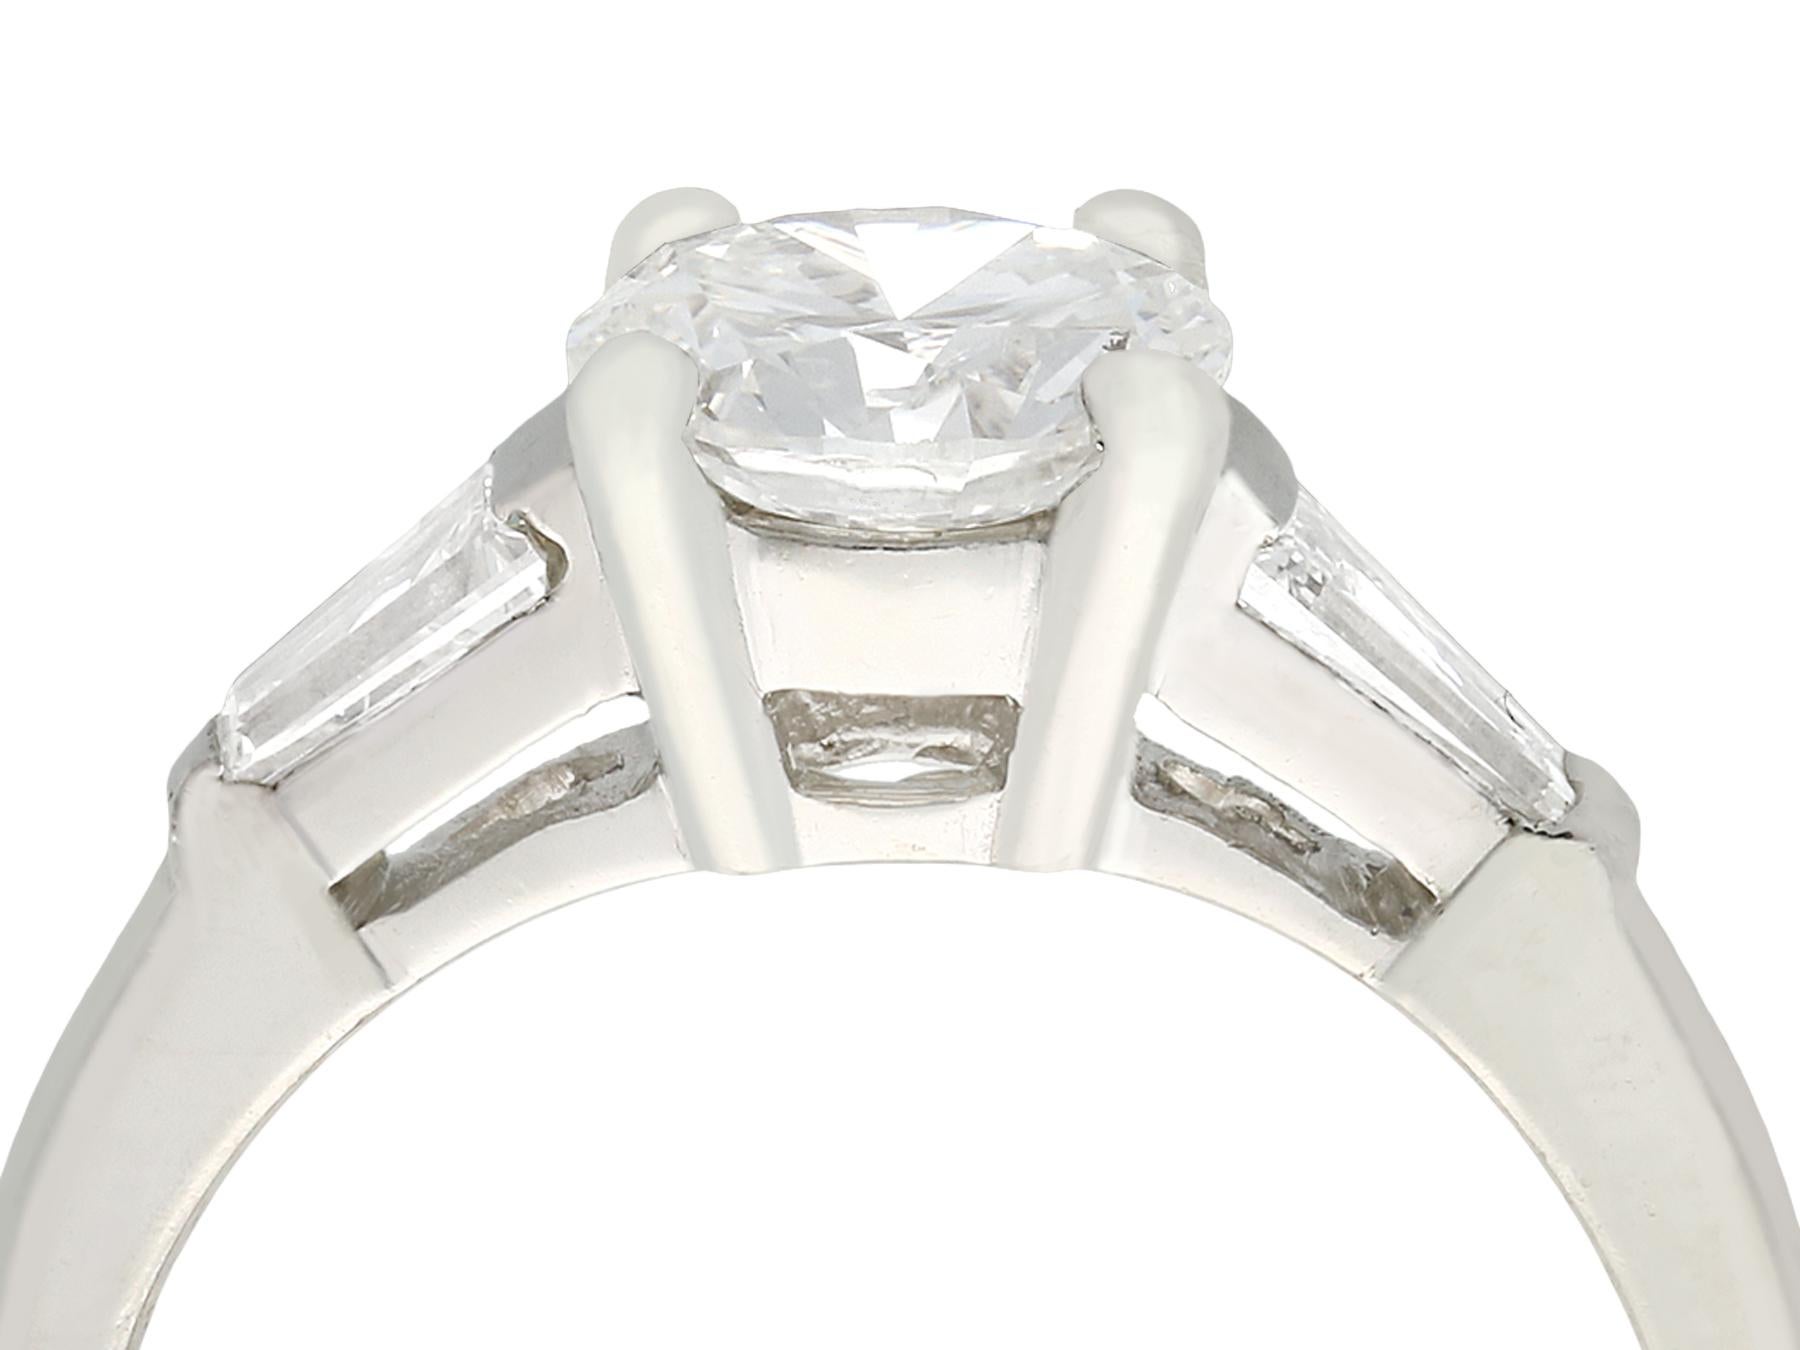 A fine and impressive 1.32Ct diamond (total) and platinum solitaire ring; part of our diverse jewelry and estate jewelry collections.

This fine and impressive vintage solitaire ring has been crafted in platinum.

The pierced decorated mount is